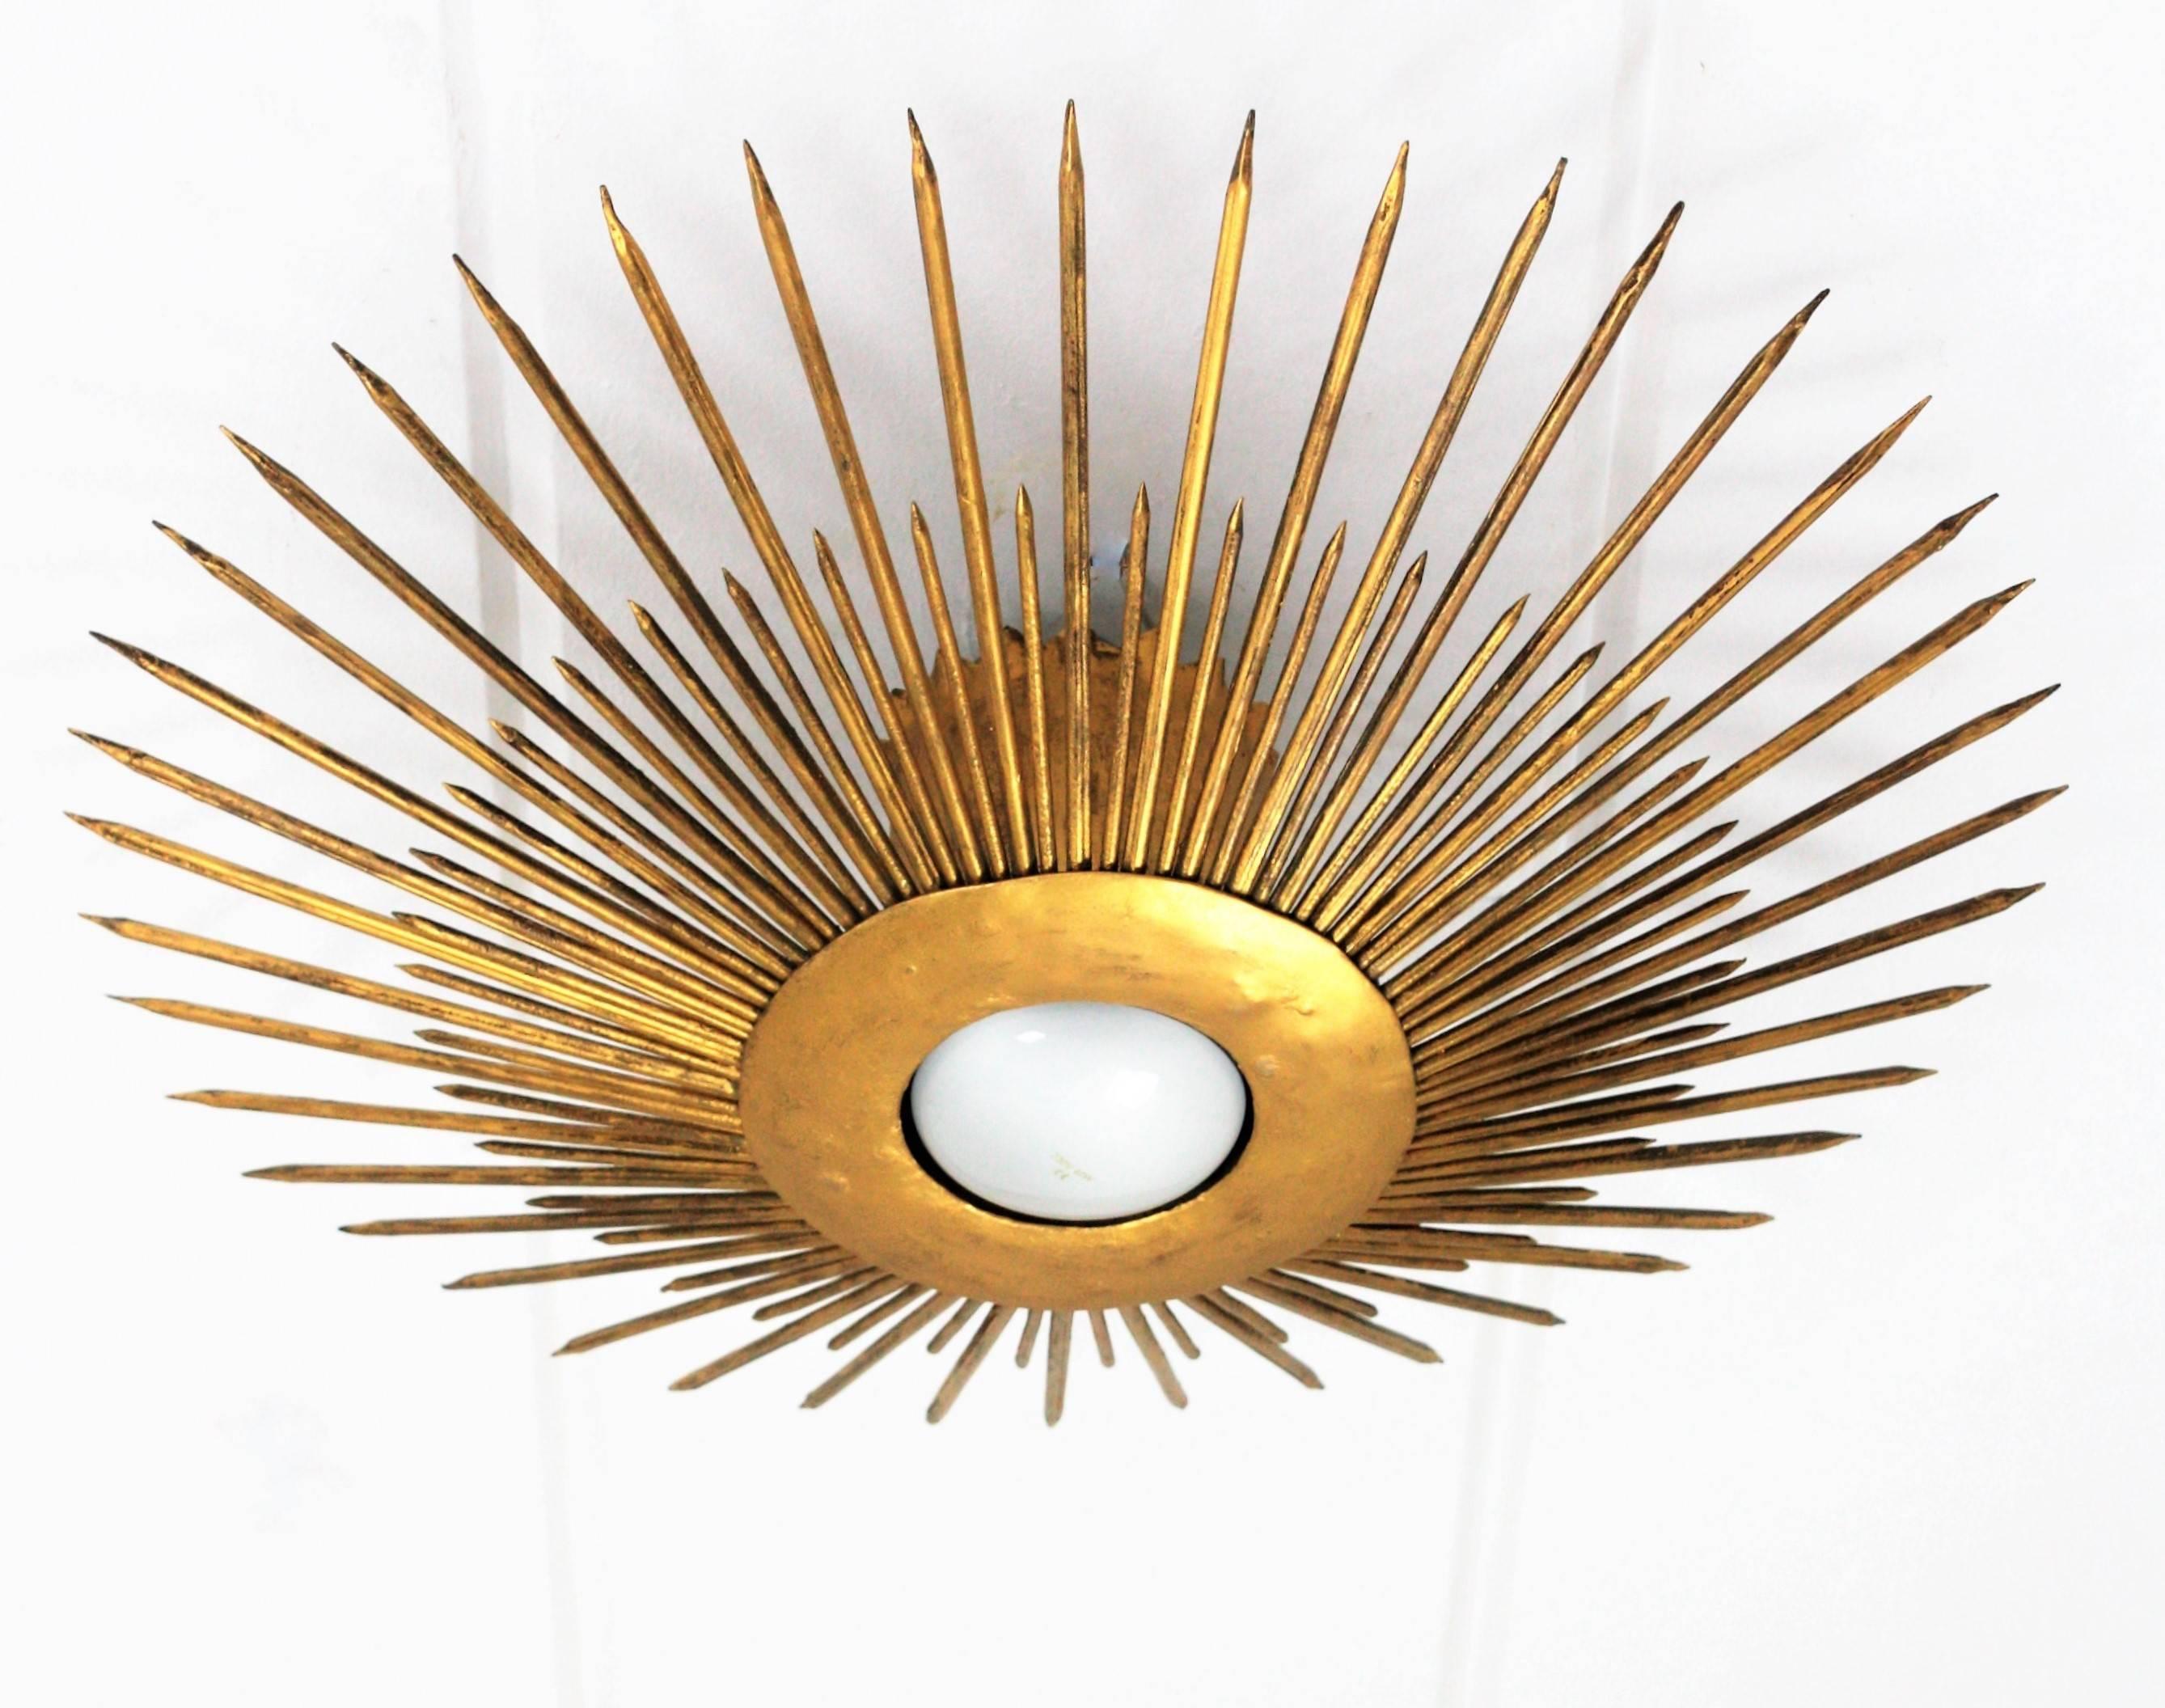 A hand-hammered gilt sunburst ceiling light fixture with gold leaf finish and Art Deco accents in transition to Brutalist style. France, 1930s-1940s.
A highly decorative piece with frontal Light. It has iron nails in two sizes as sun beams